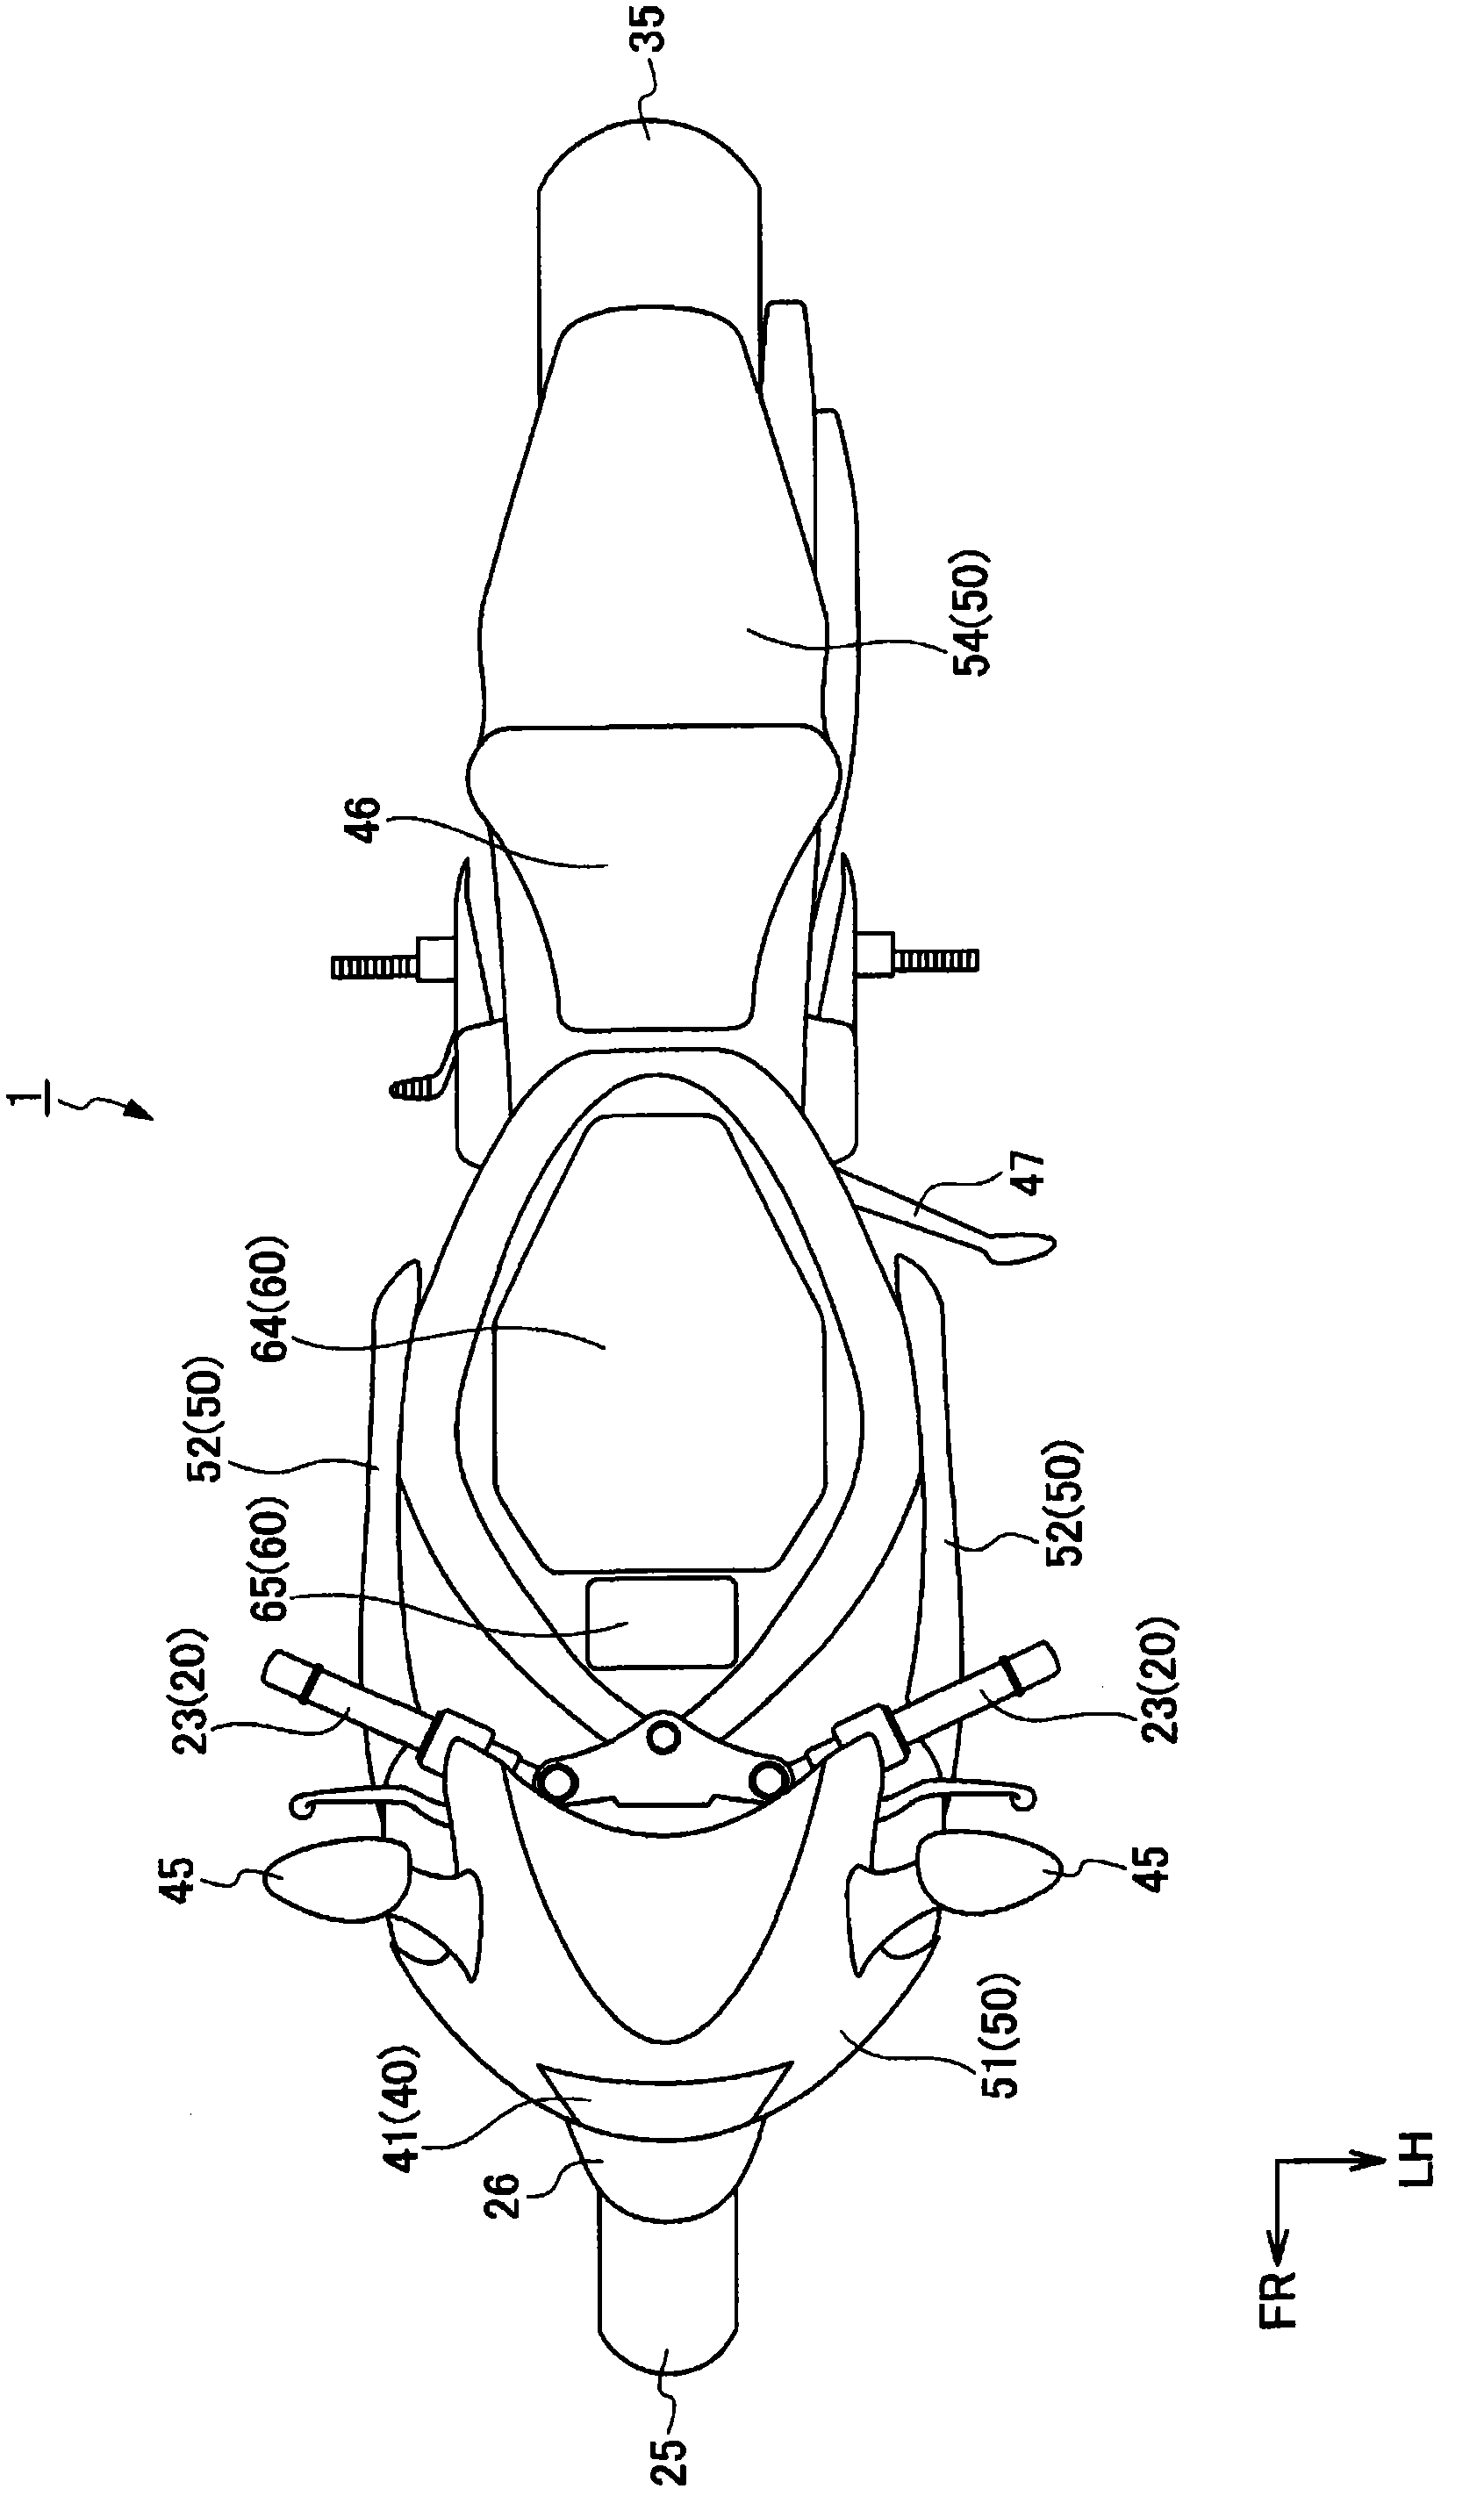 Storage structure for power connector for straddle-type vehicles